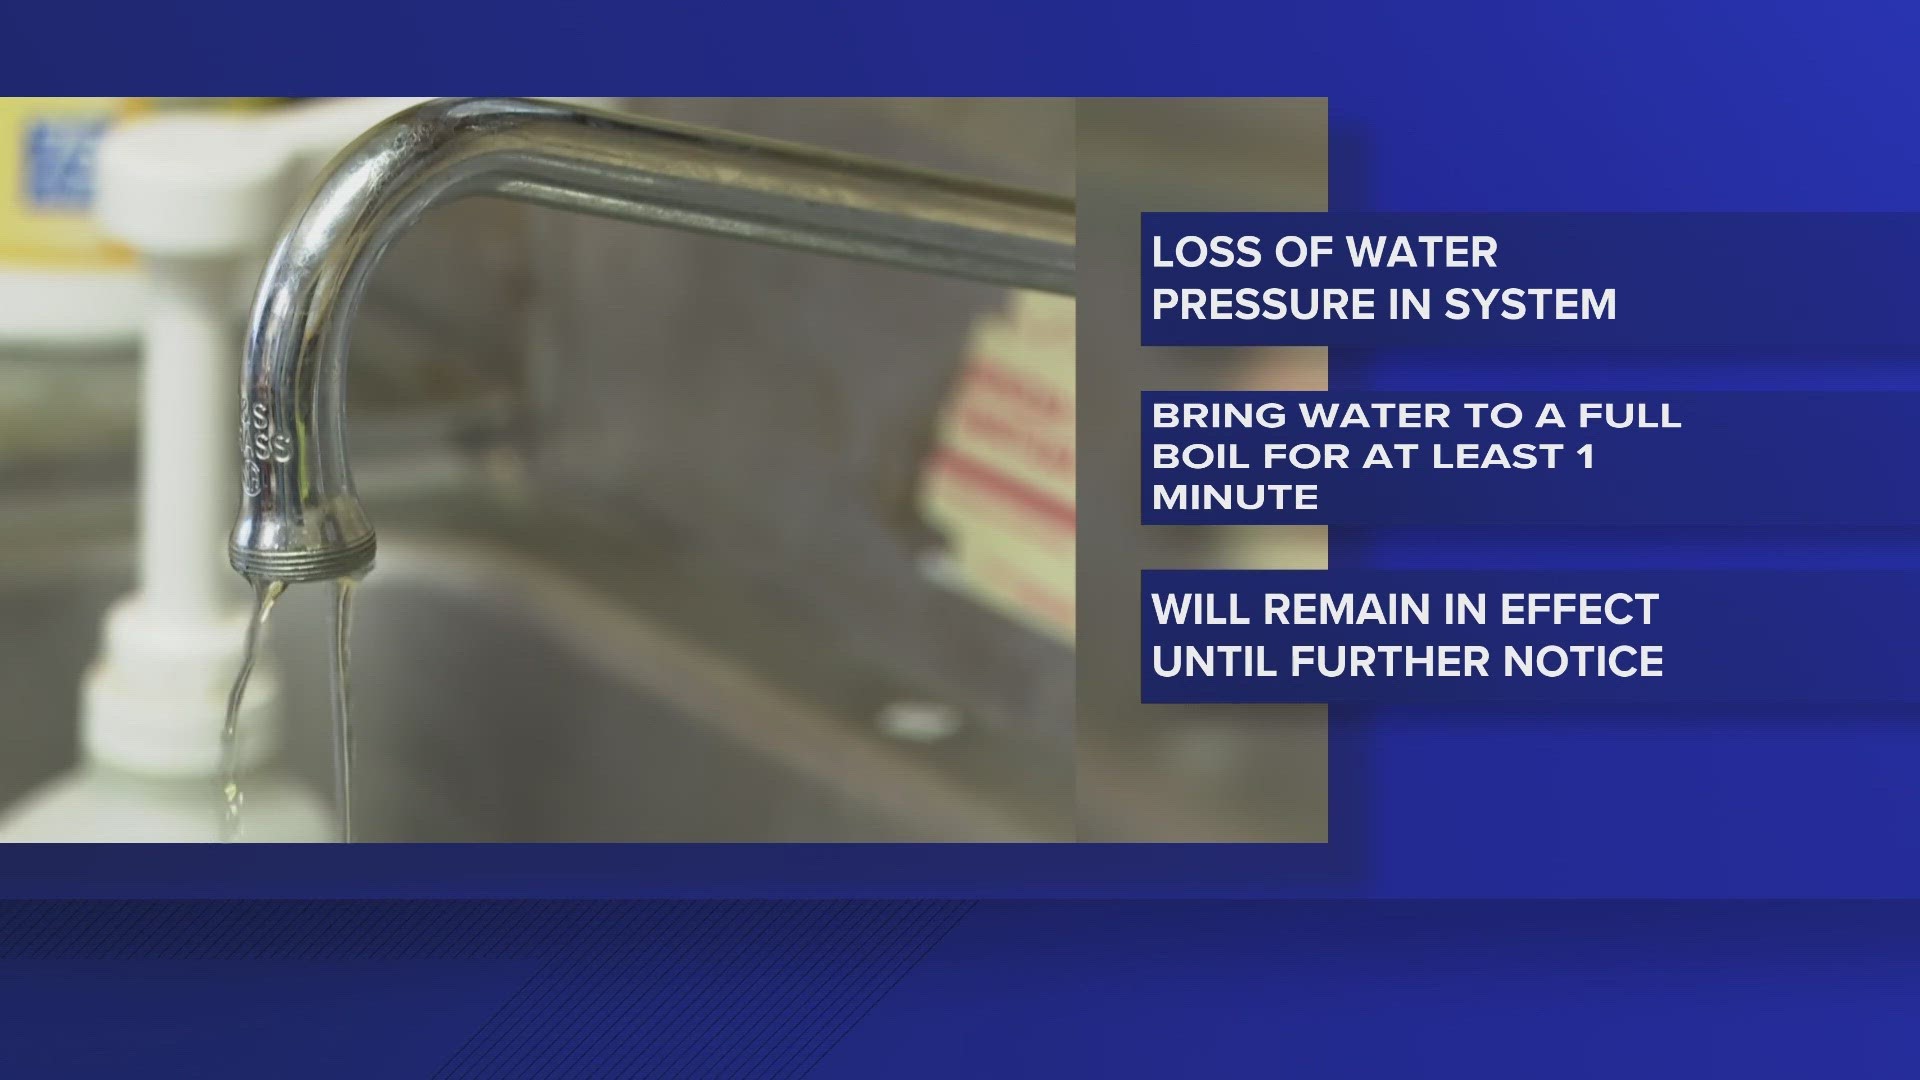 City advises boiling water before any type of consumption until further notice.